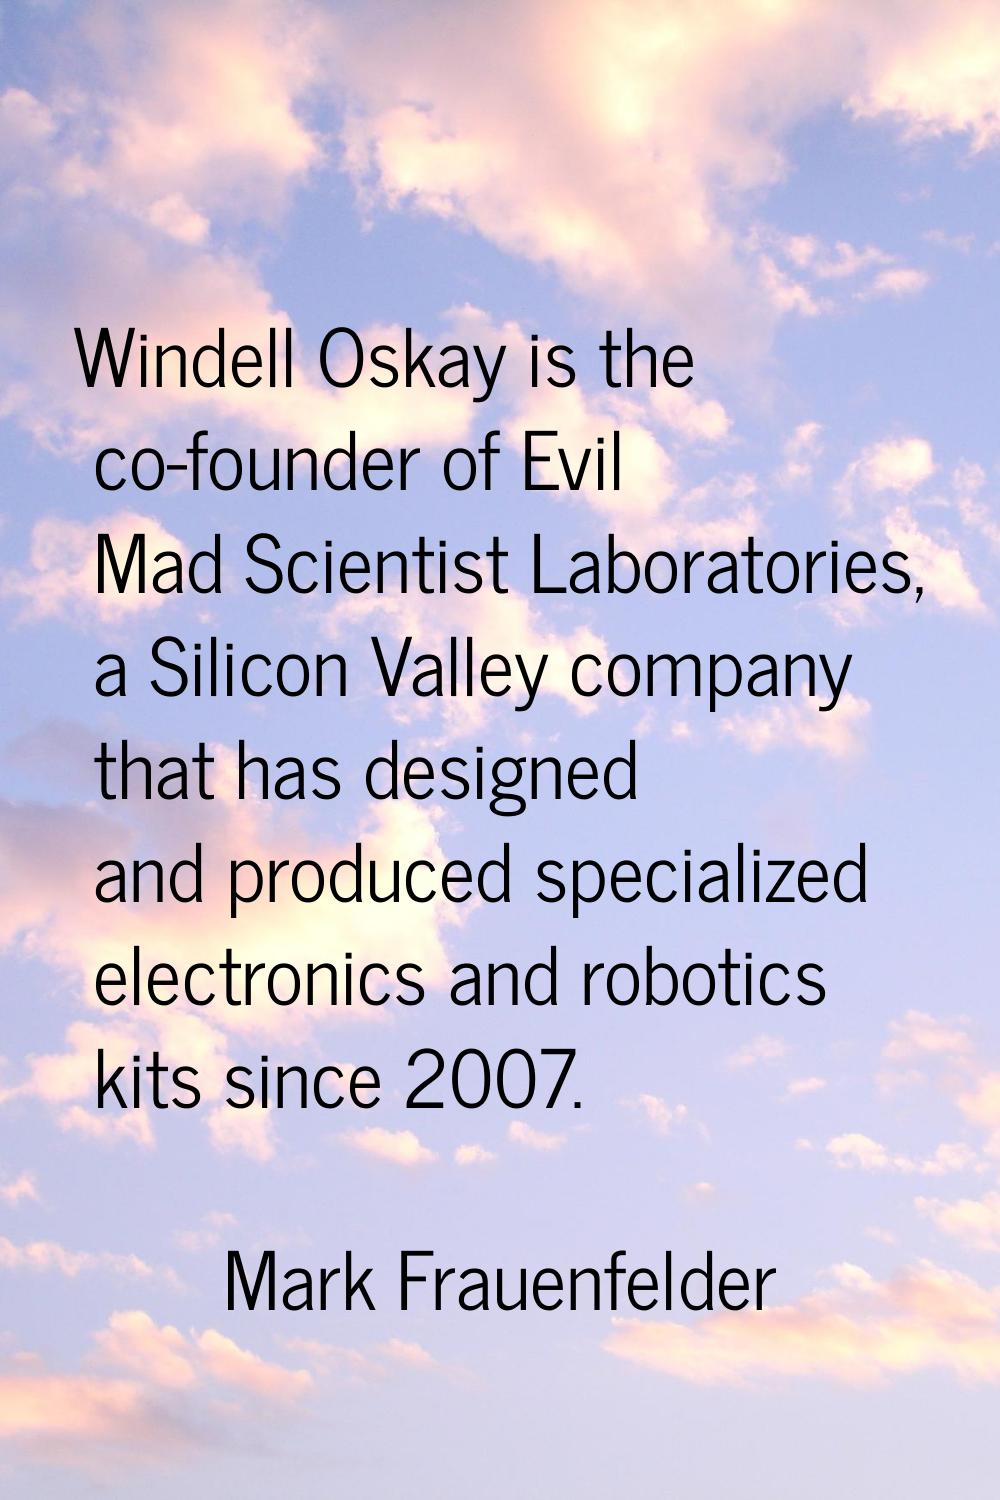 Windell Oskay is the co-founder of Evil Mad Scientist Laboratories, a Silicon Valley company that h